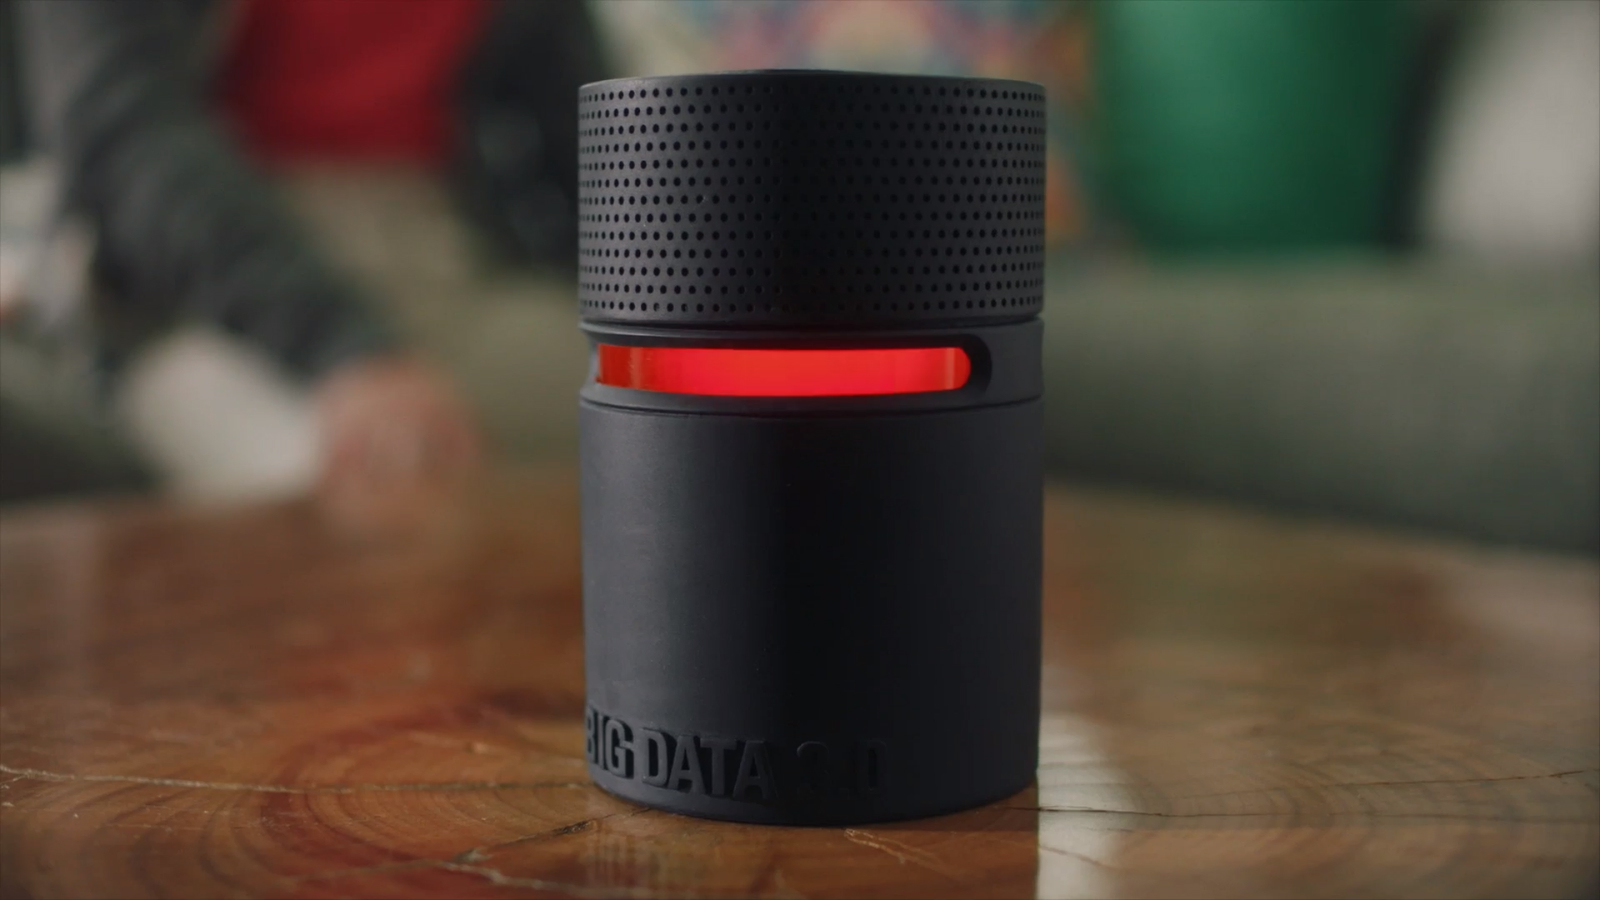 voice assistant big data l1zy takes over 1a